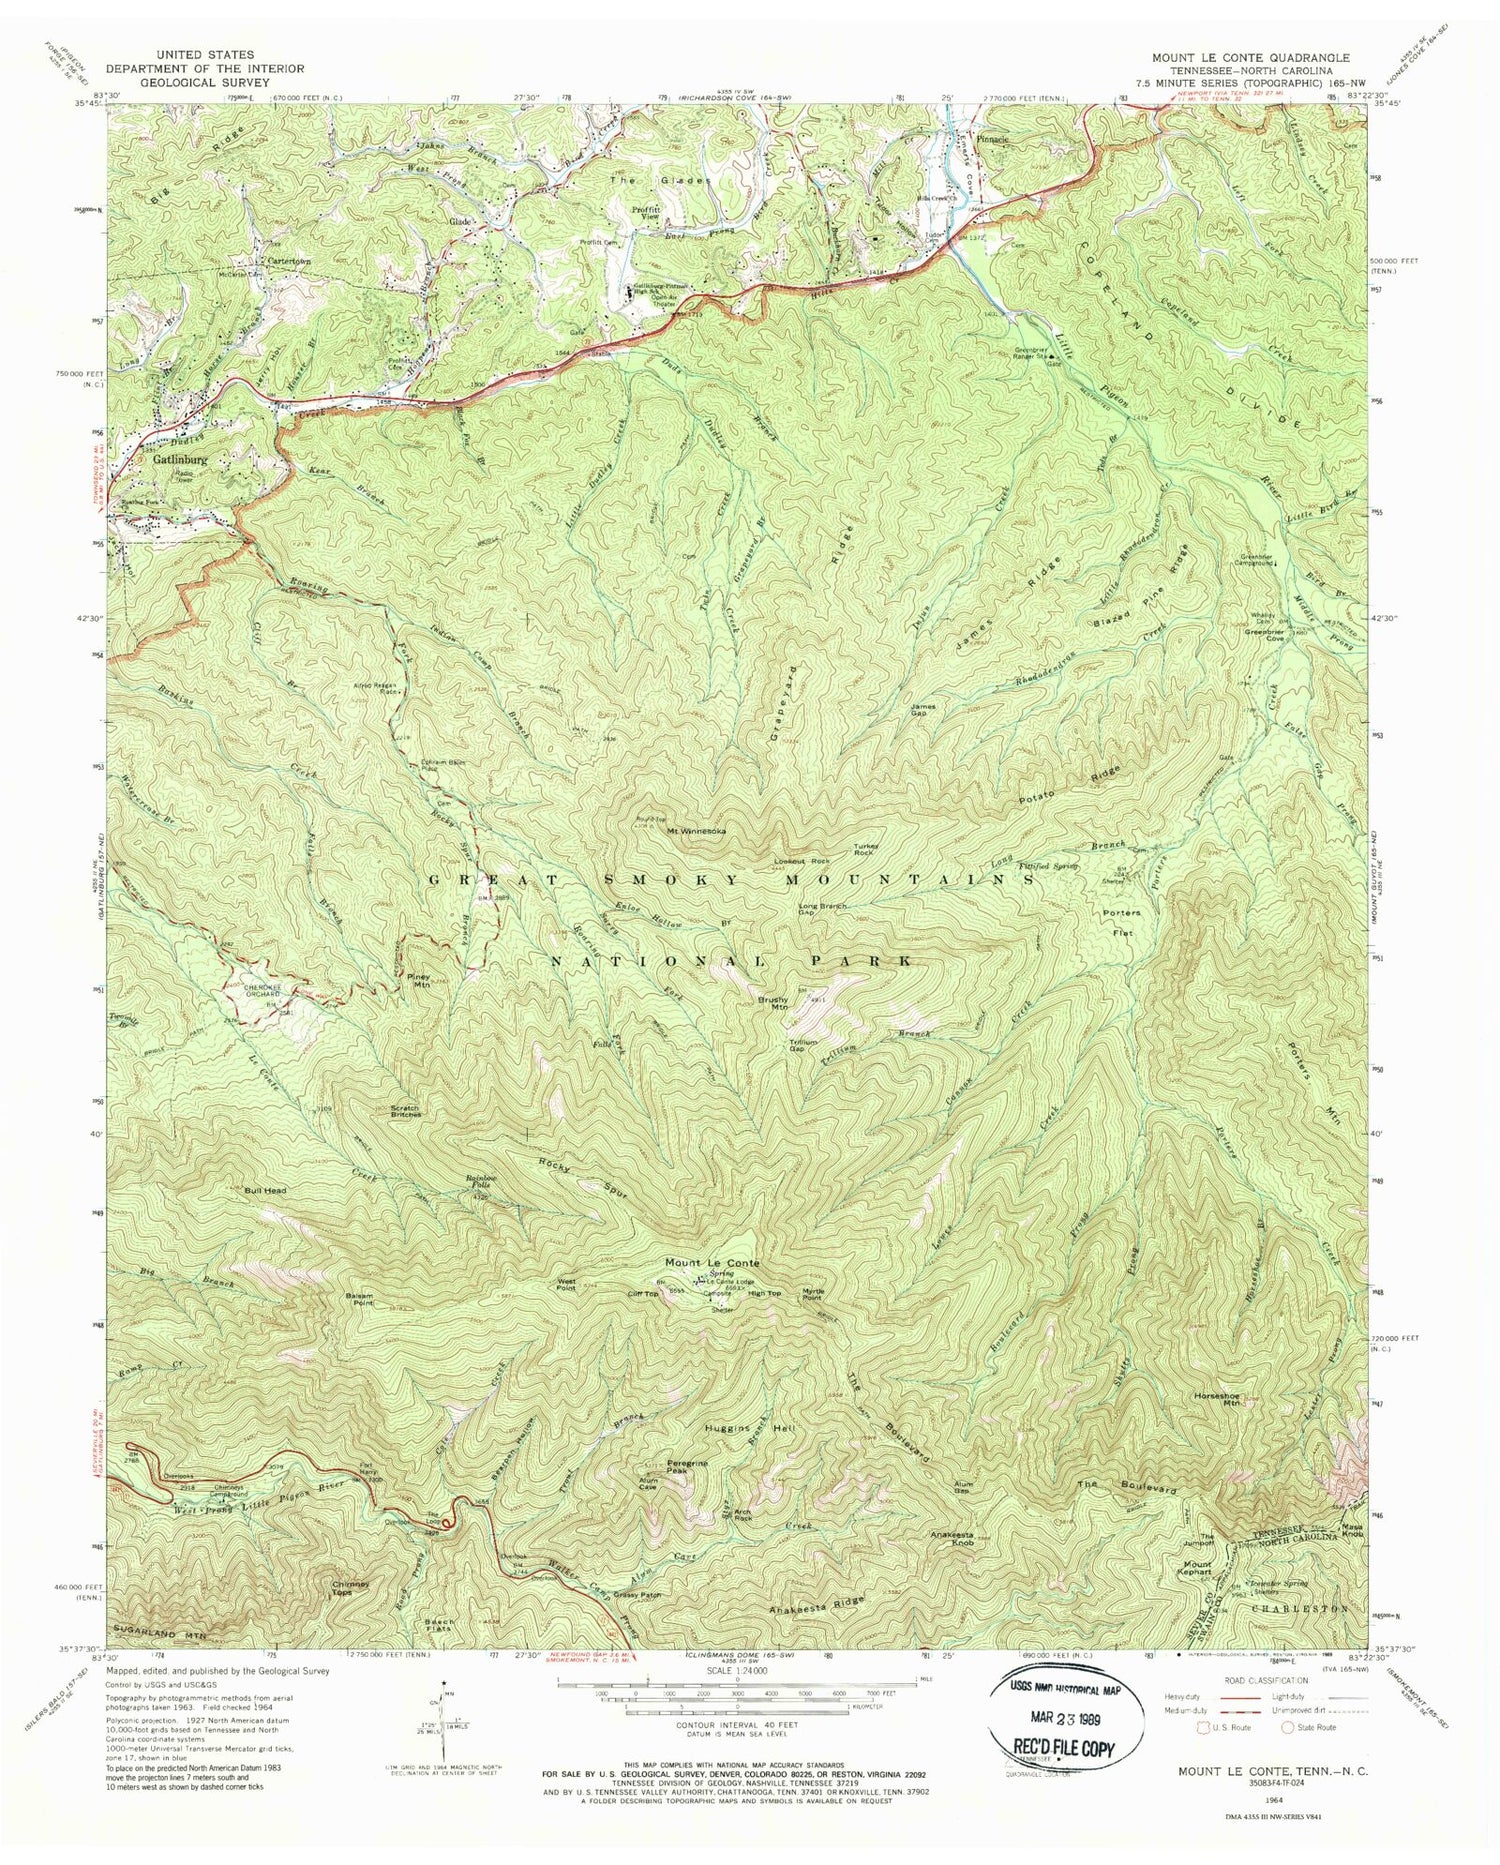 USGS Classic Mount Le Conte Tennessee 7.5'x7.5' Topo Map Image